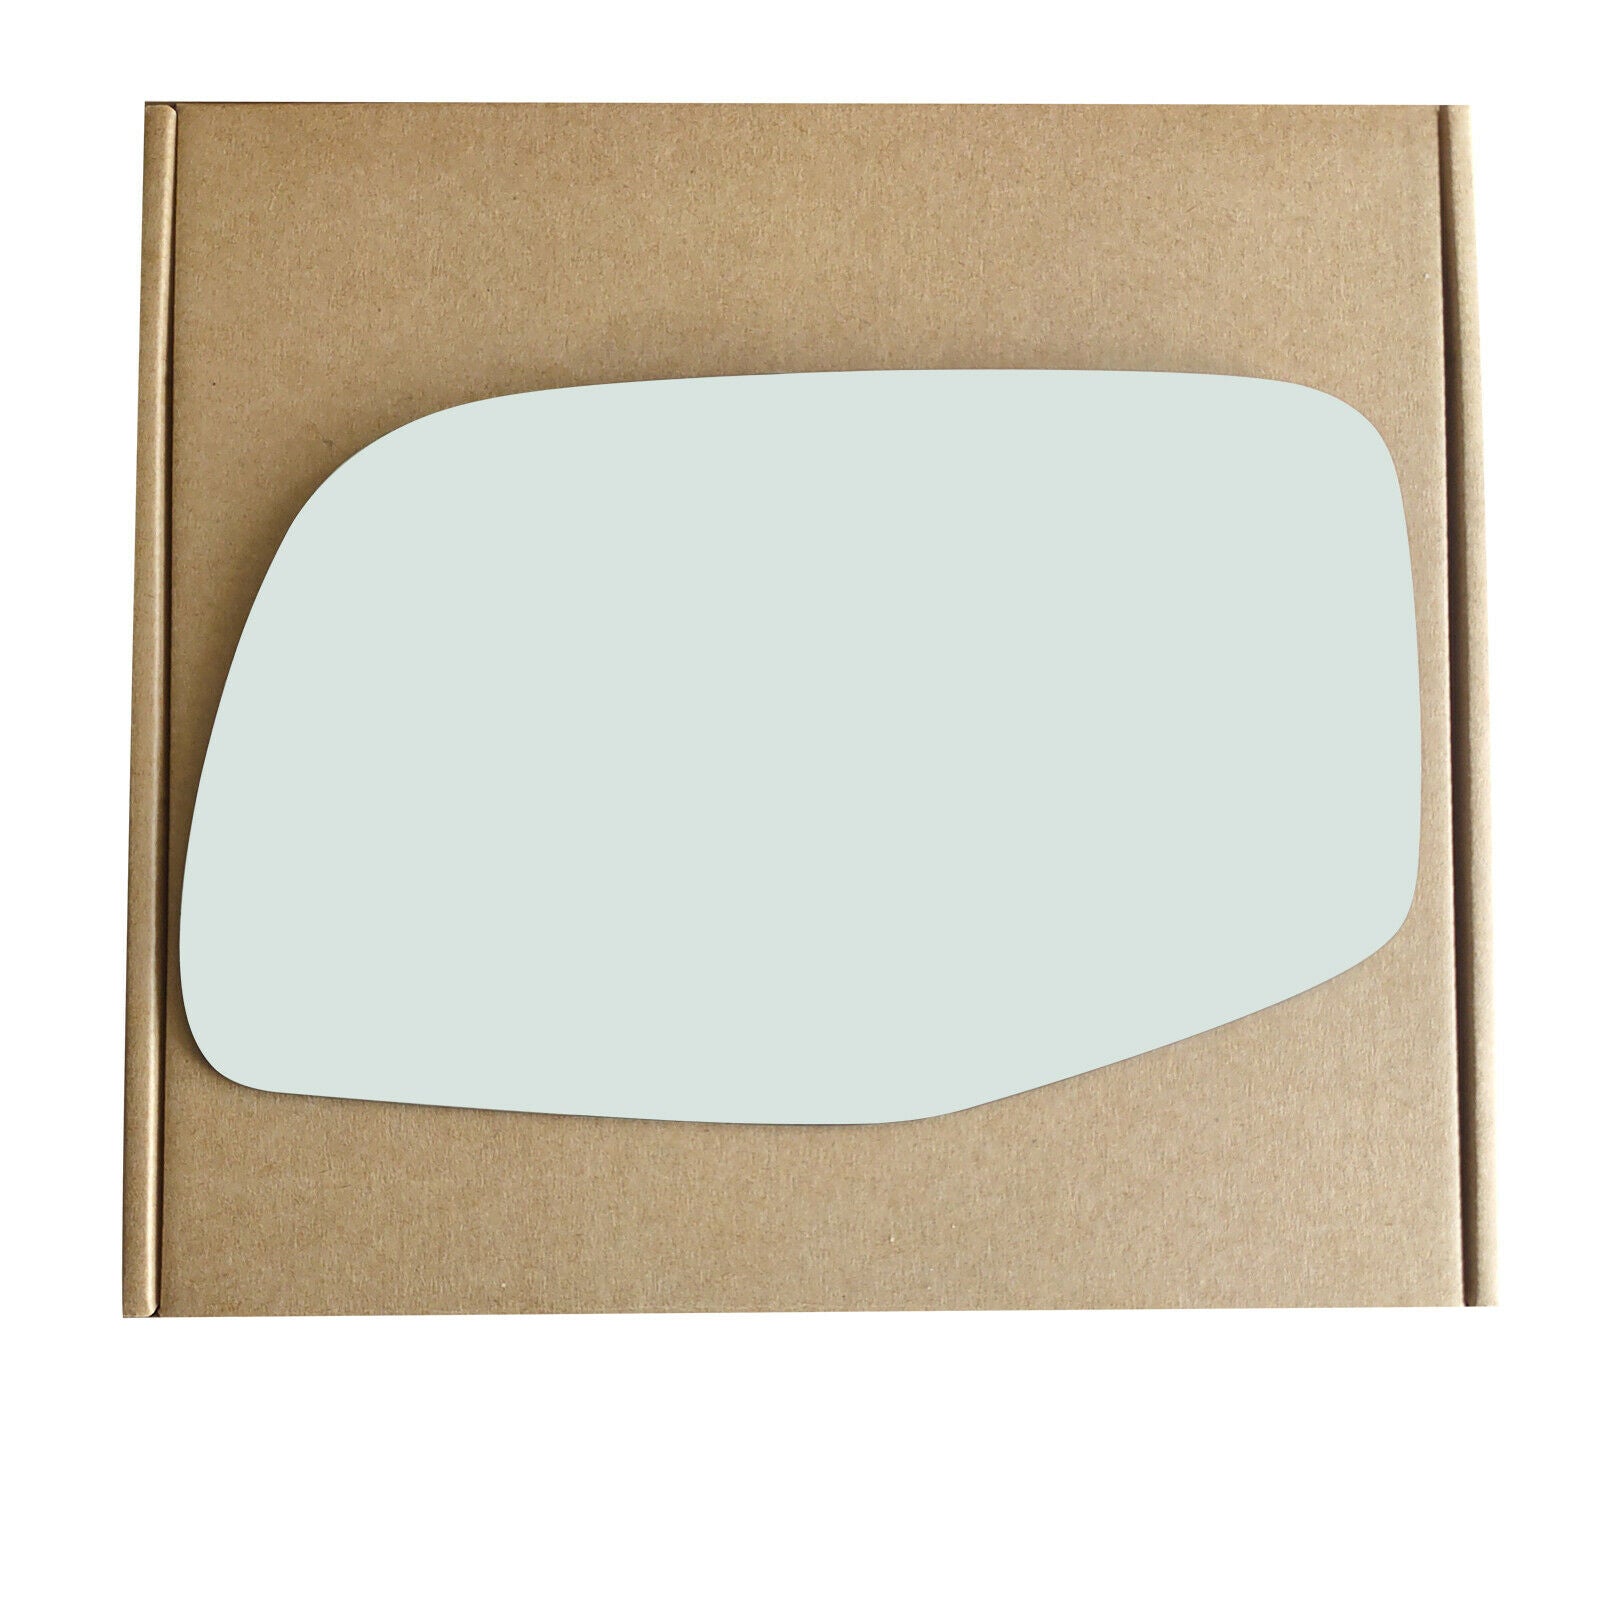 WLLW Mirror Glass Replacement for Ford 89-97 Aerostar/92-96 Bronco/92-97 F Super Duty/92-98 F150 F250 F350 F450, Driver Left LH/Passenger Right RH/The Both Sides Flat Convex M-0057